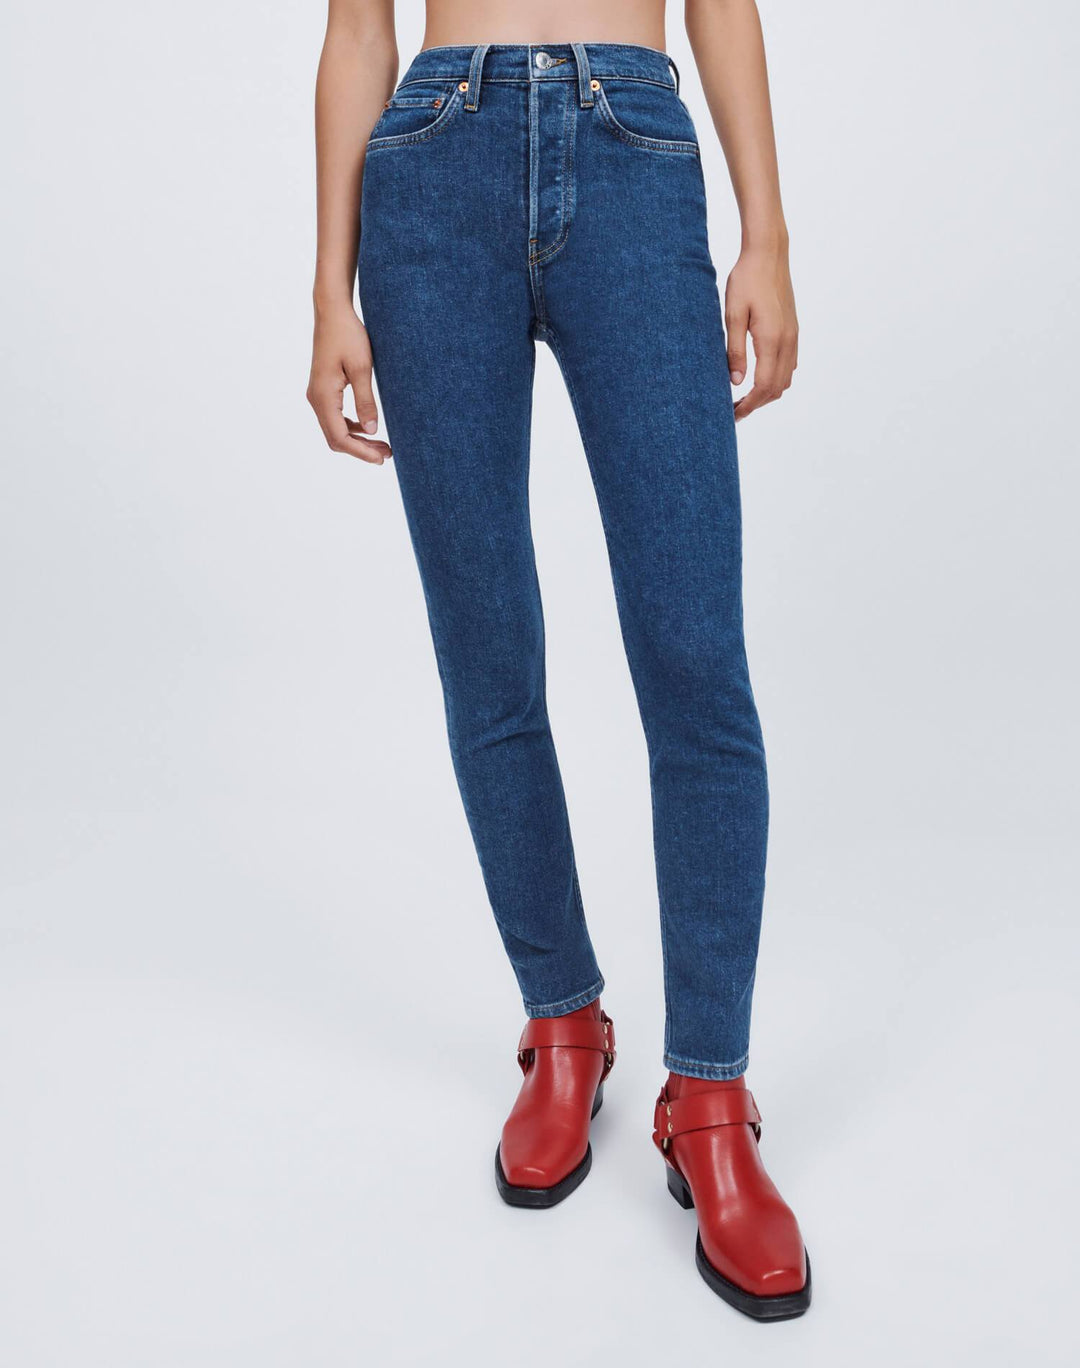 Ethical Denim Brands Creating Sustainable Jeans for Conscious Consumers - RE/DONE